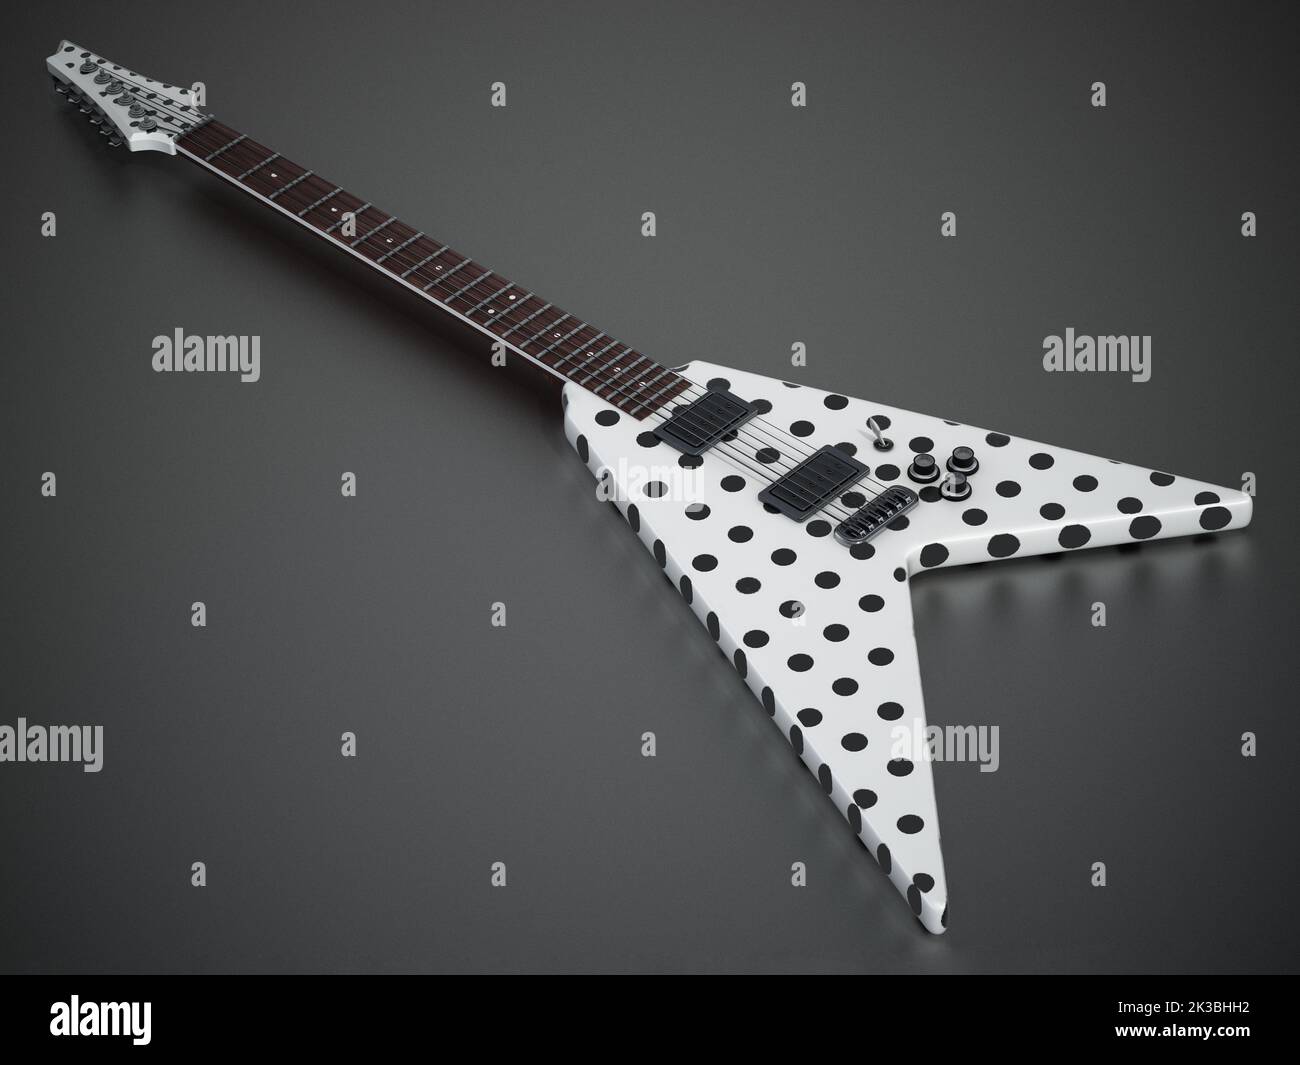 Flying V electric guitar isolated on dark background. 3D illustration. Stock Photo